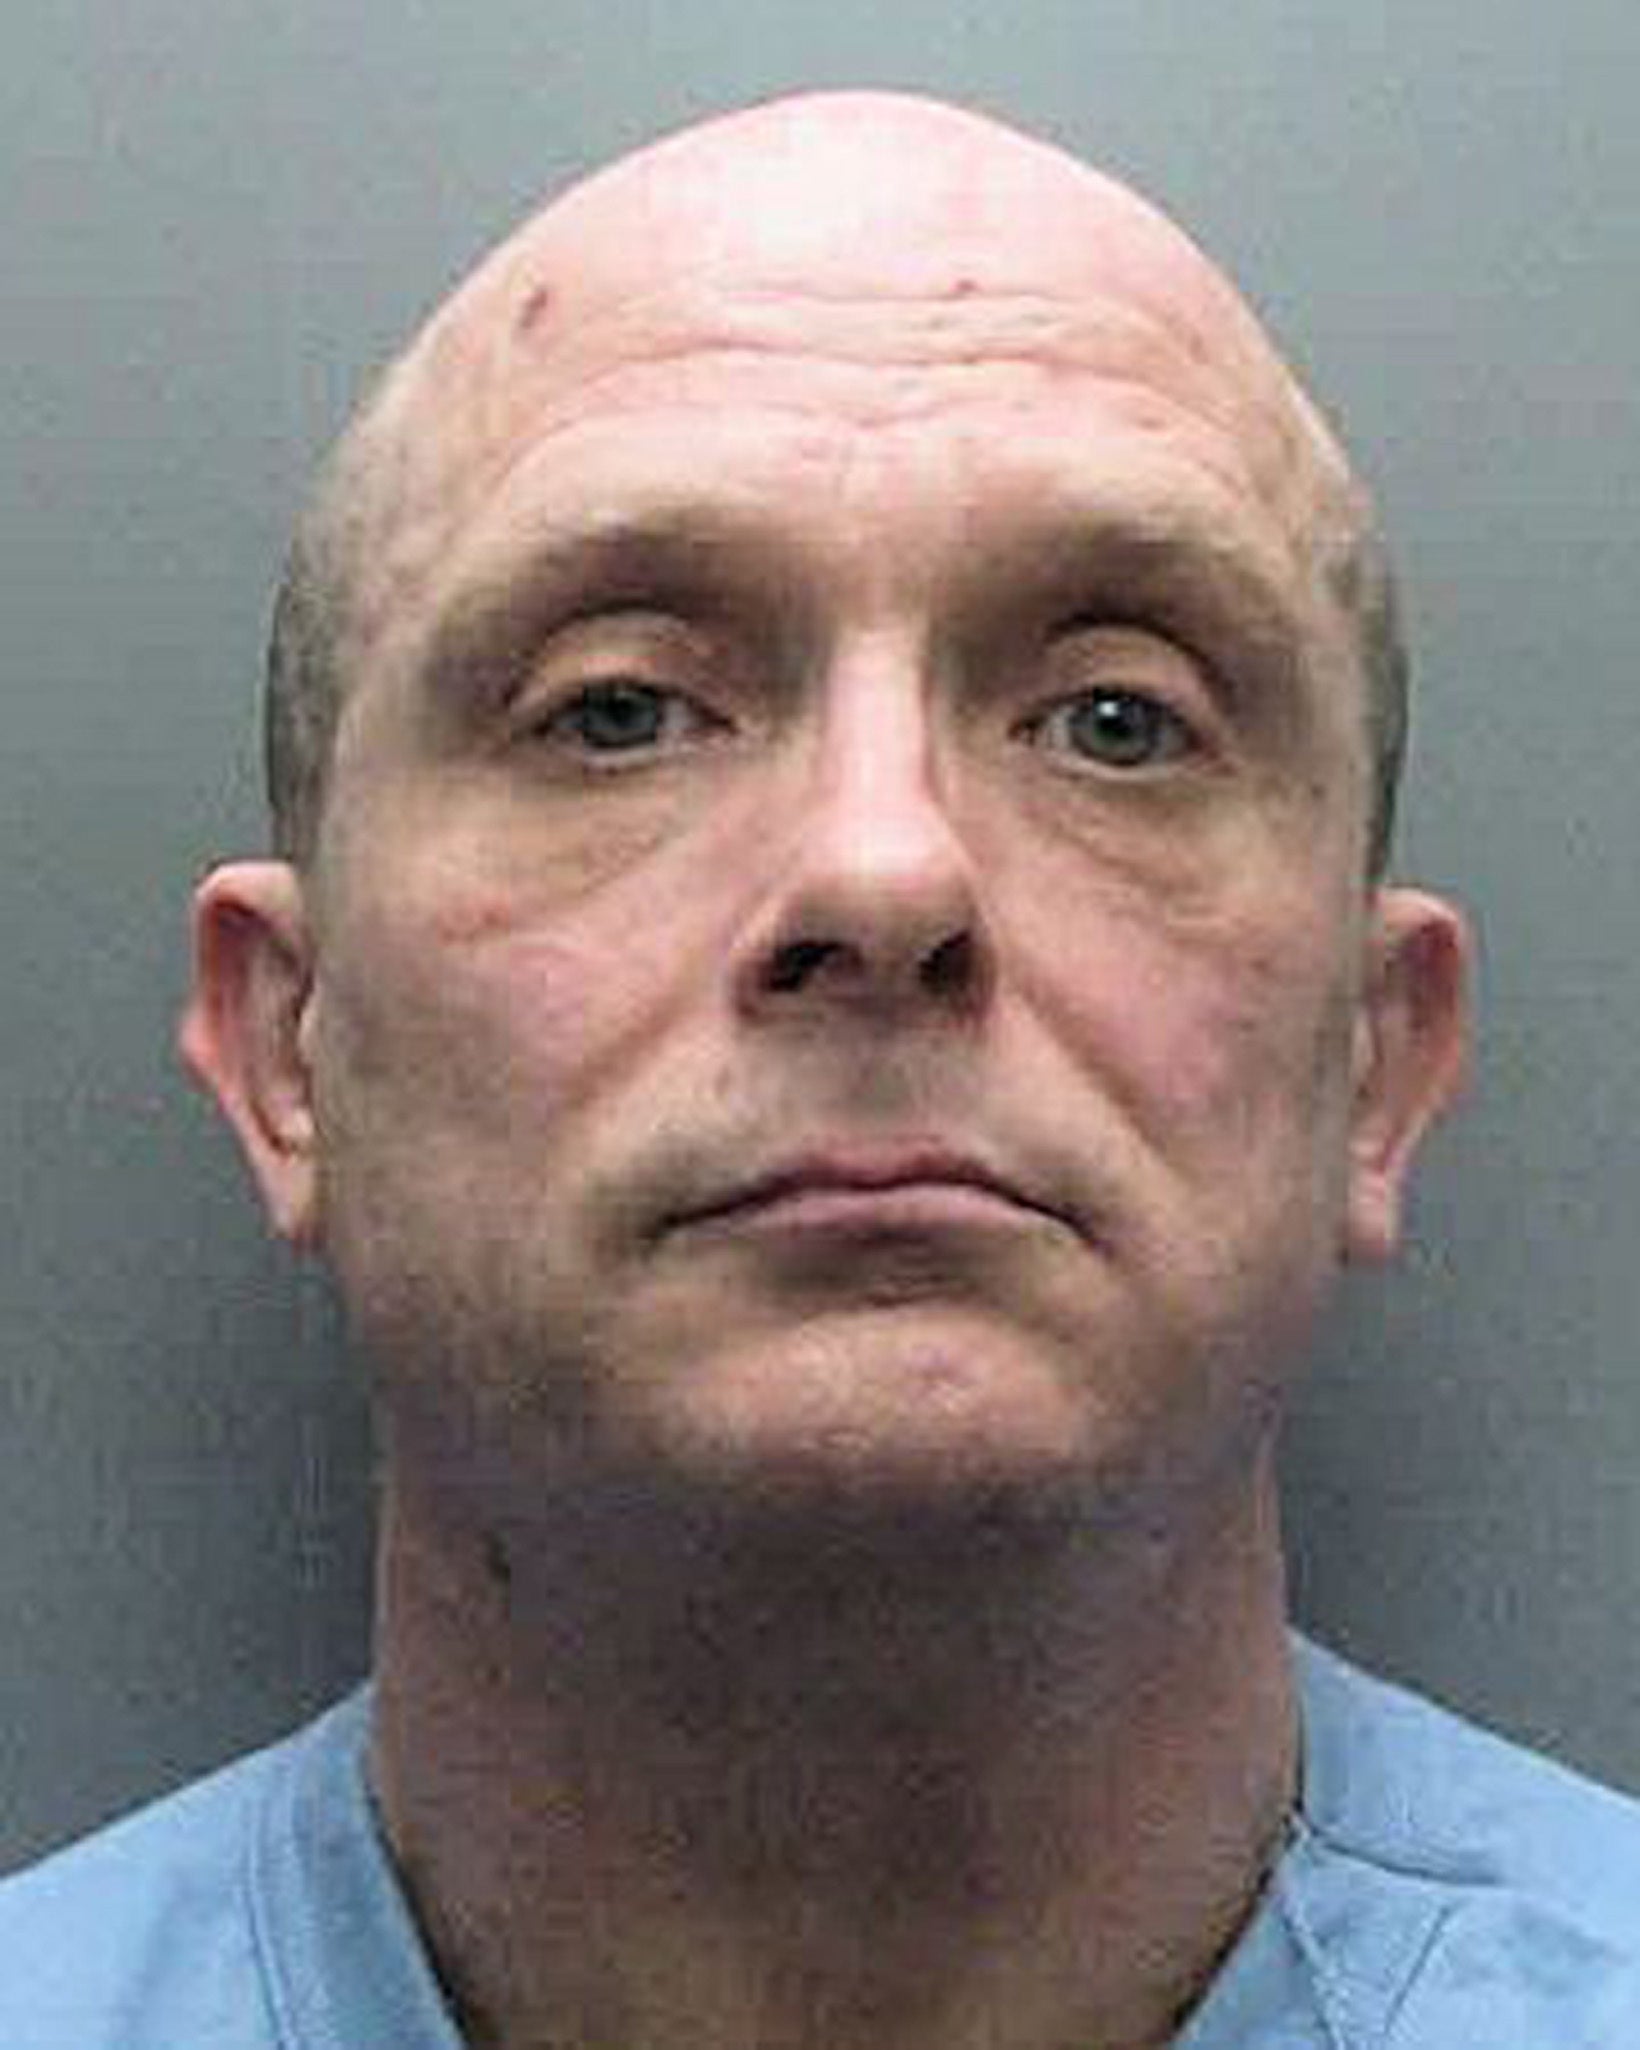 Babes in the Wood killer Russell Bishop, who murdered two schoolgirls in Brighton in 1986, who has died in hospital, the Prison Service said (Sussex Police/PA)